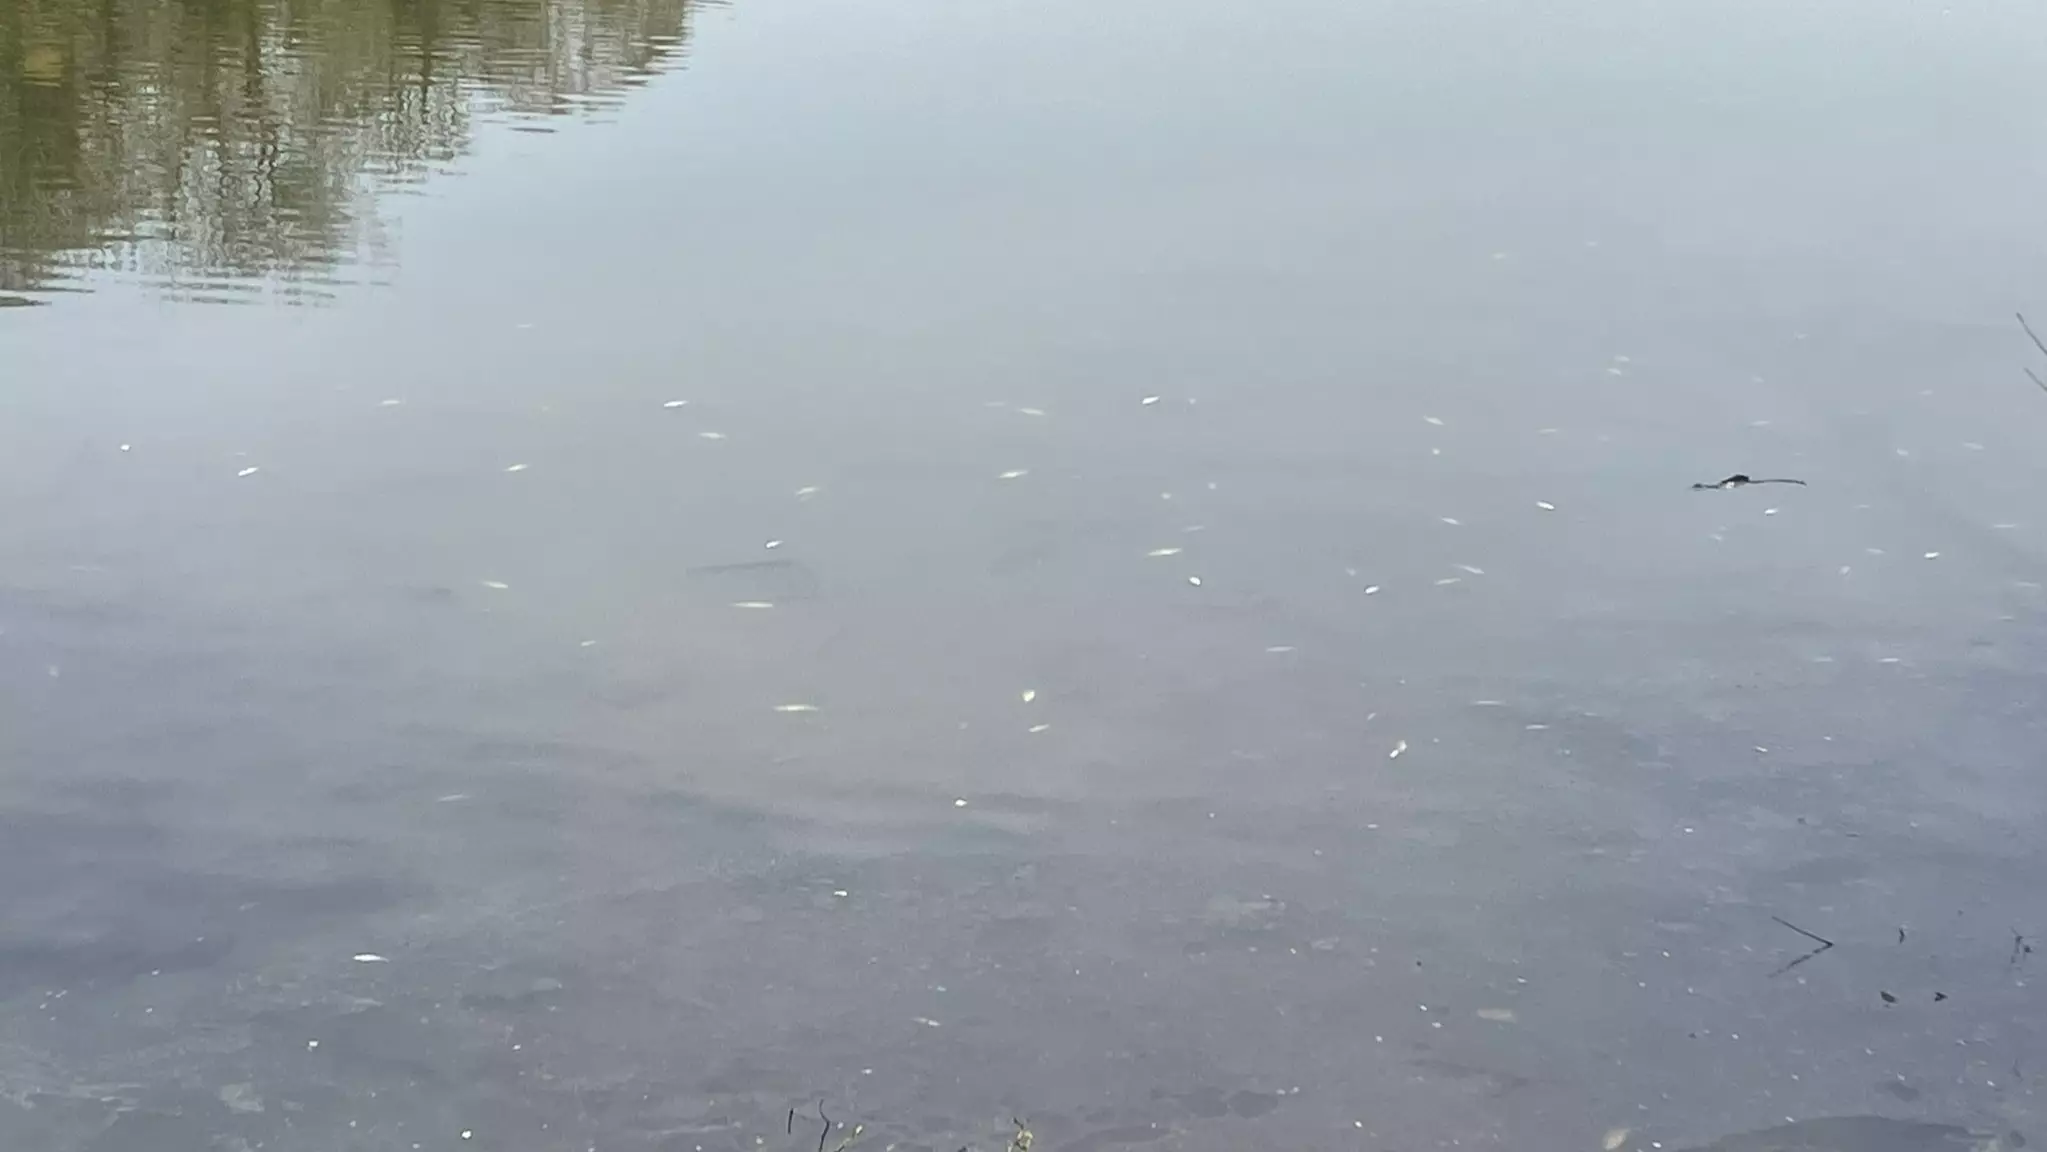 Hundreds Of Fish Killed By Pollution In UK Lake